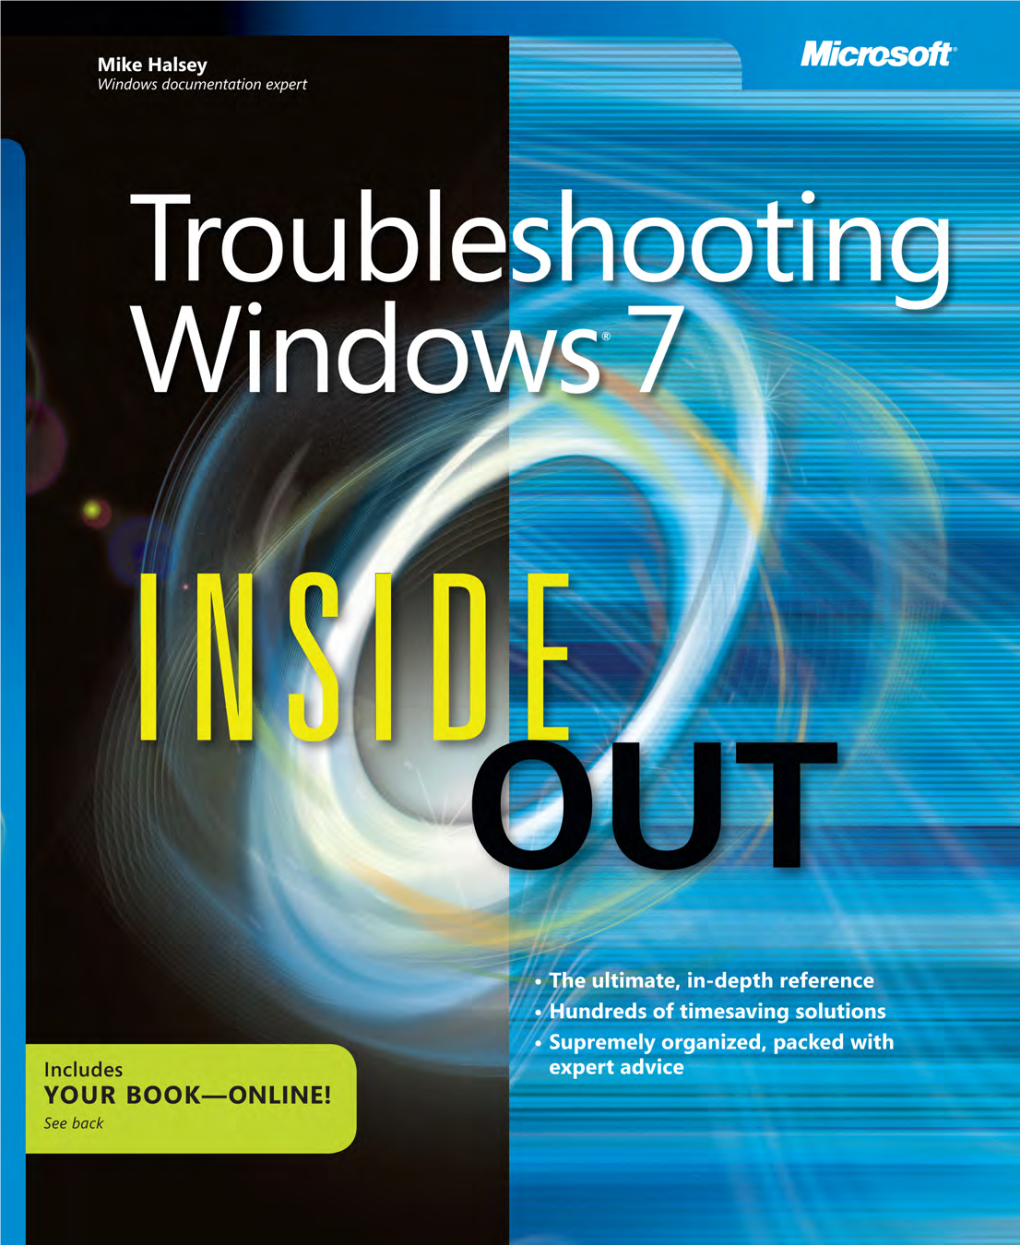 Troubleshooting Windows® 7 Inside Out